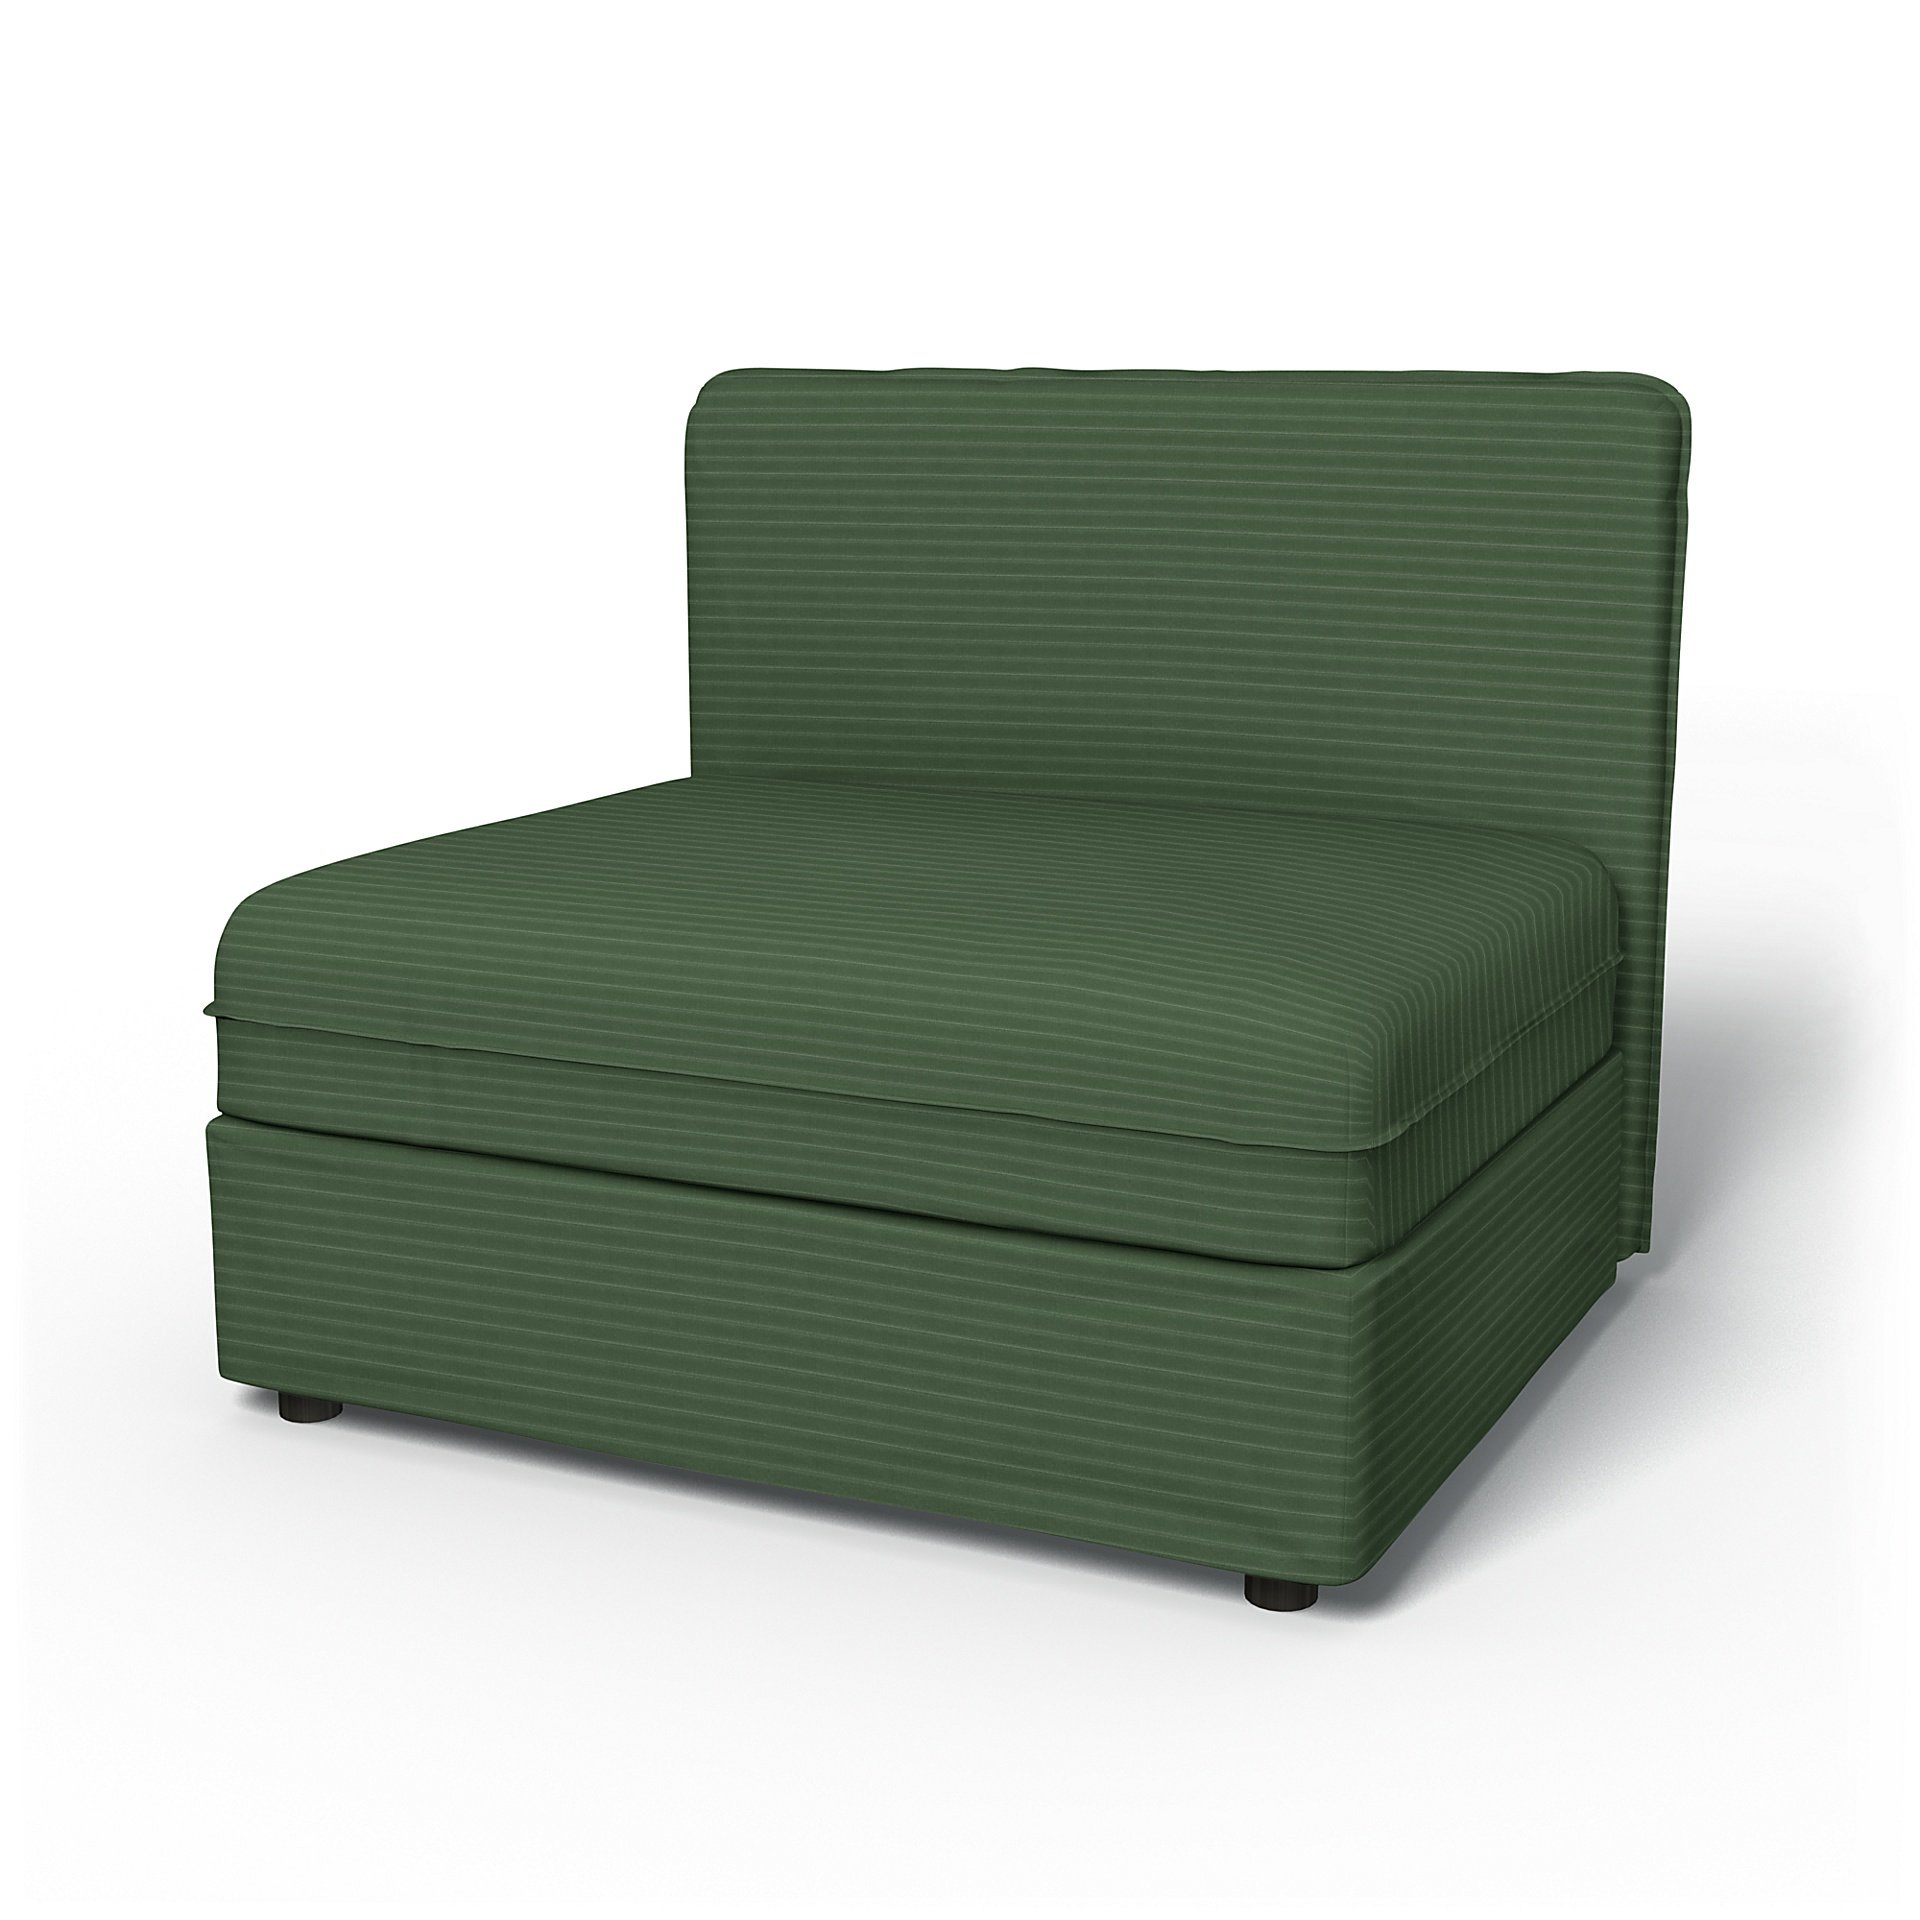 IKEA - Vallentuna Seat Module with Low Back Cover 100x80cm 39x32in, Palm Green, Corduroy - Bemz